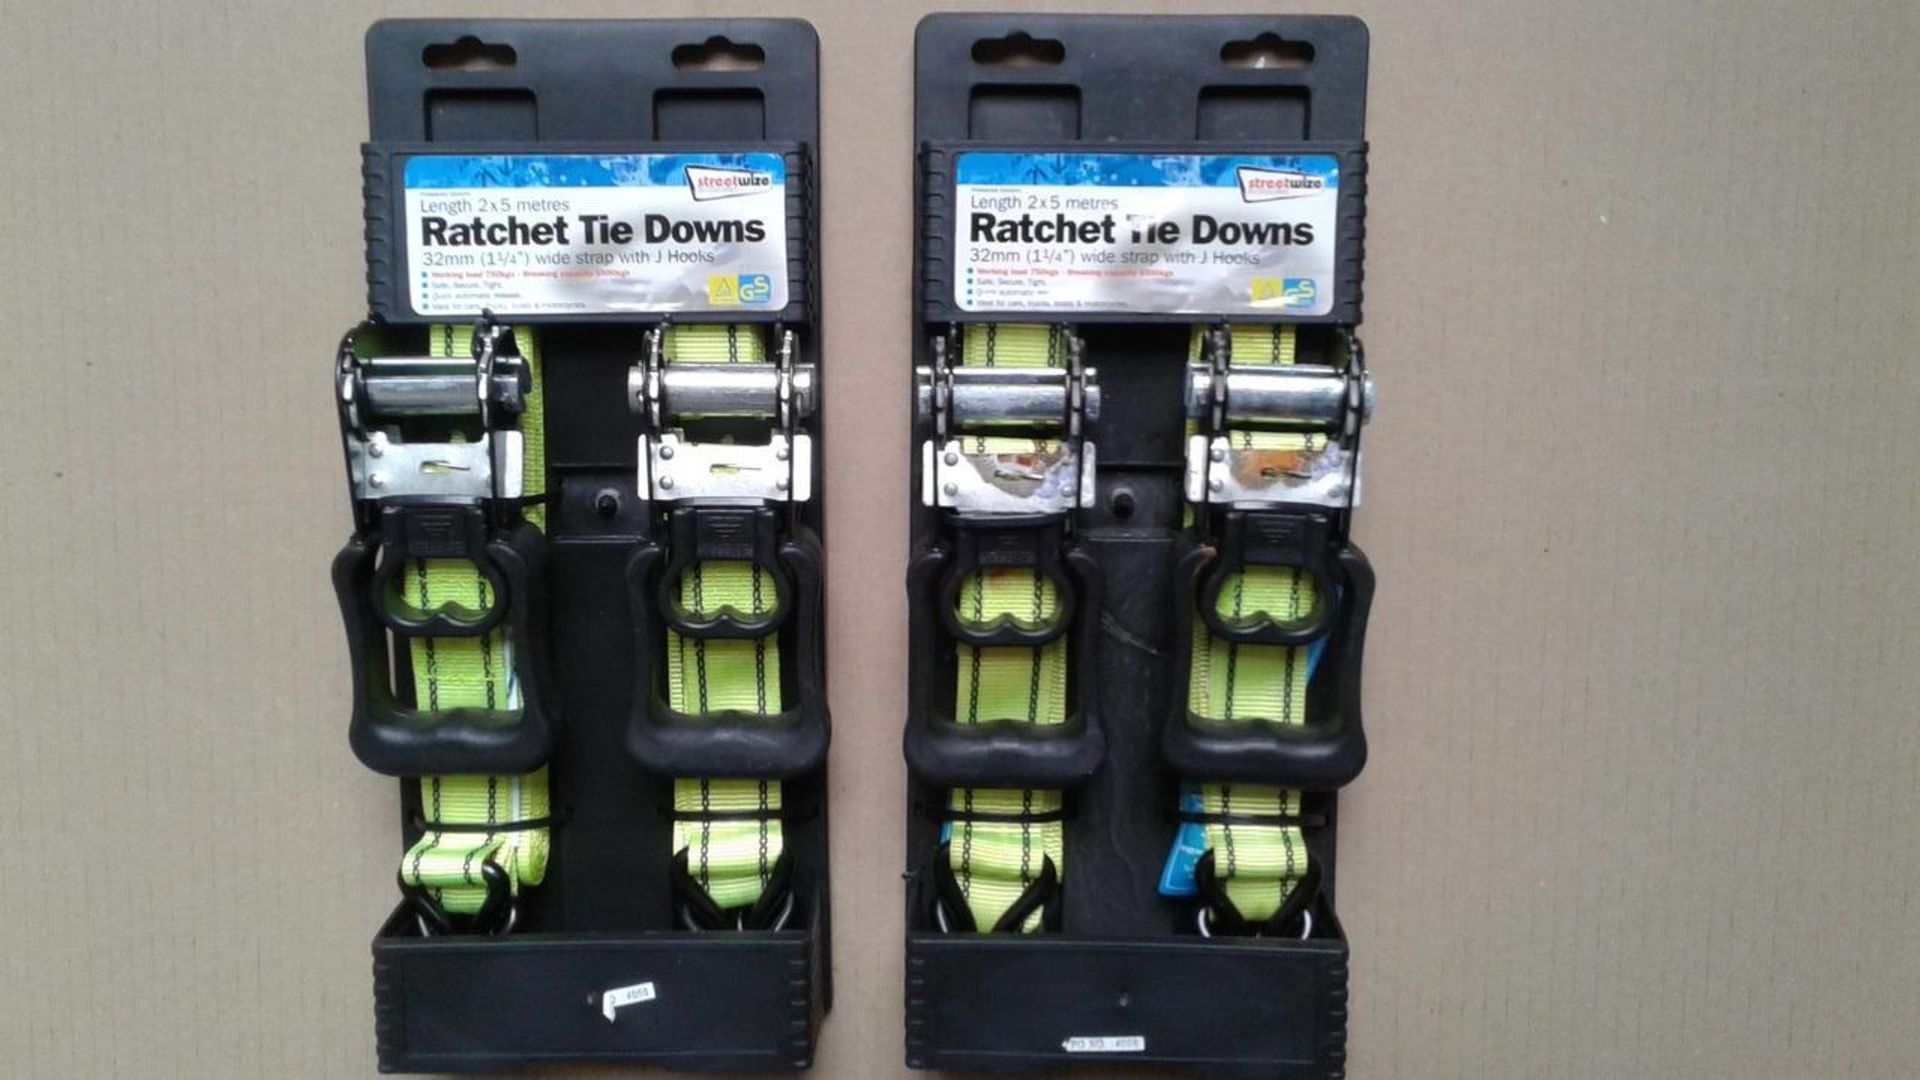 5 x sets 5metre heavy duty ratchet tie down set - new unused - some oxidised metal on some sets -